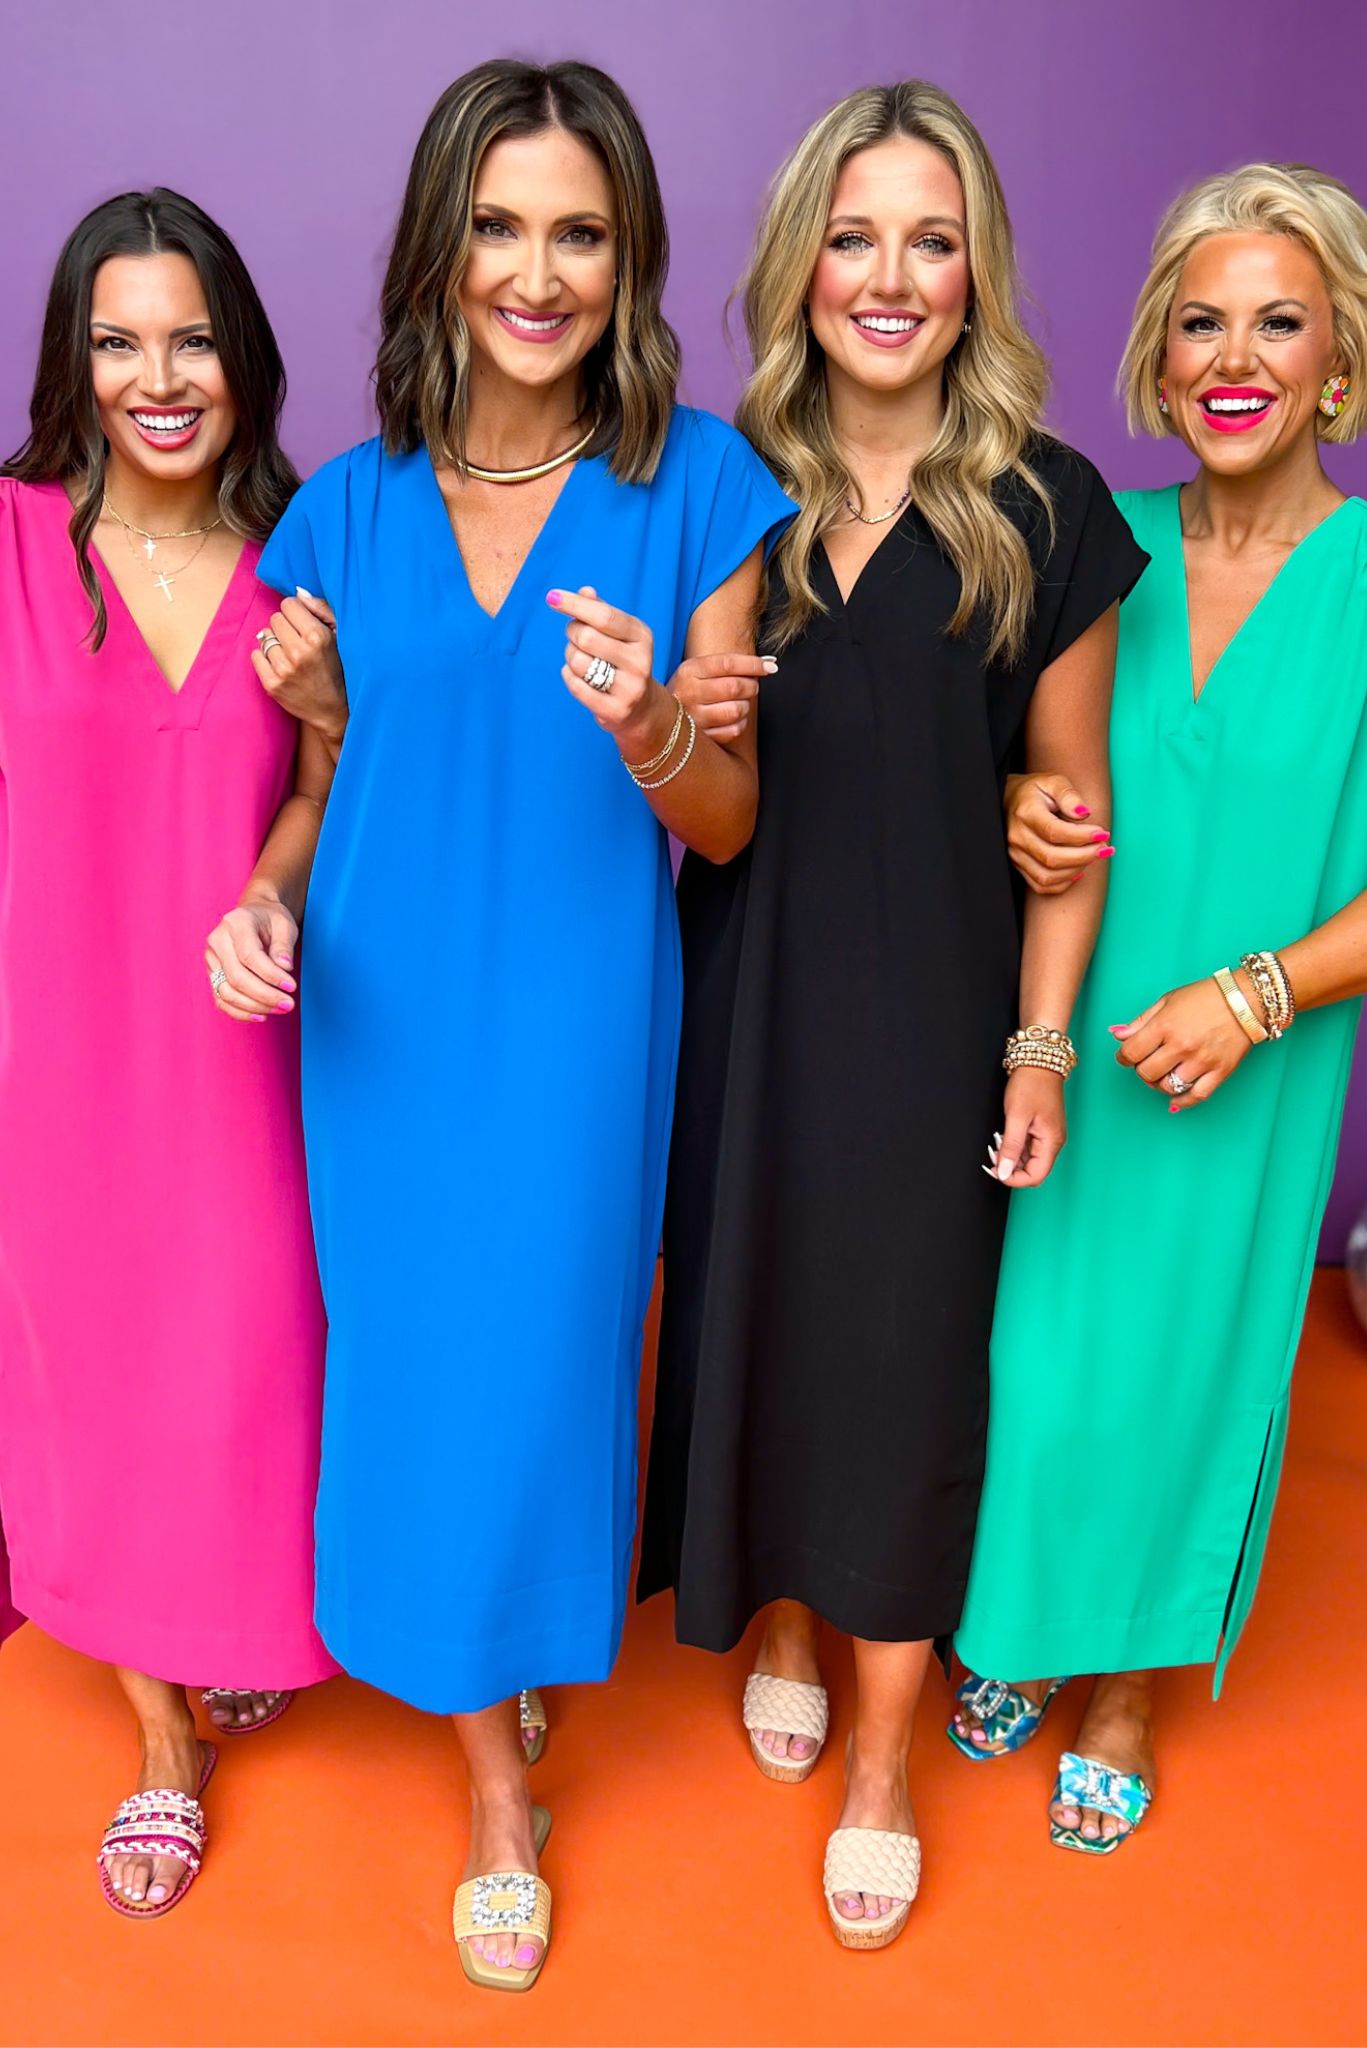 SSYS The Iris Maxi Dress In Emerald, ssys the label, the iris dress, ssys dress, elevated dress, must have dress, maxi dress, everyday dress, summer dress, summer style, shop style your senses by Mallory Fitzsimmons, ssys by Mallory Fitzsimmons,  Edit alt text